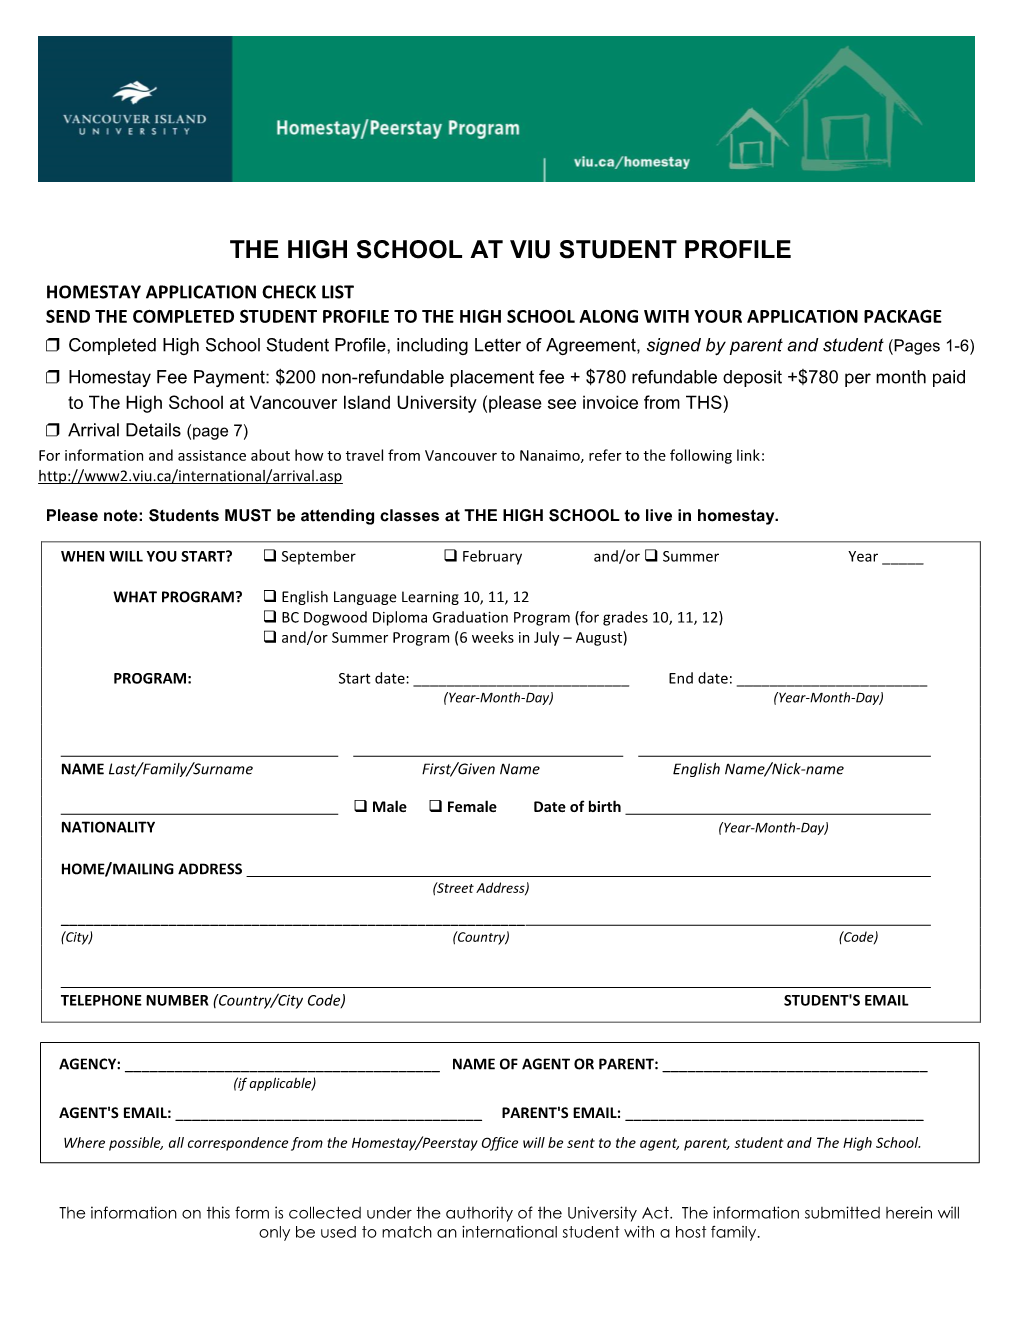 The High School at Viu Student Profile